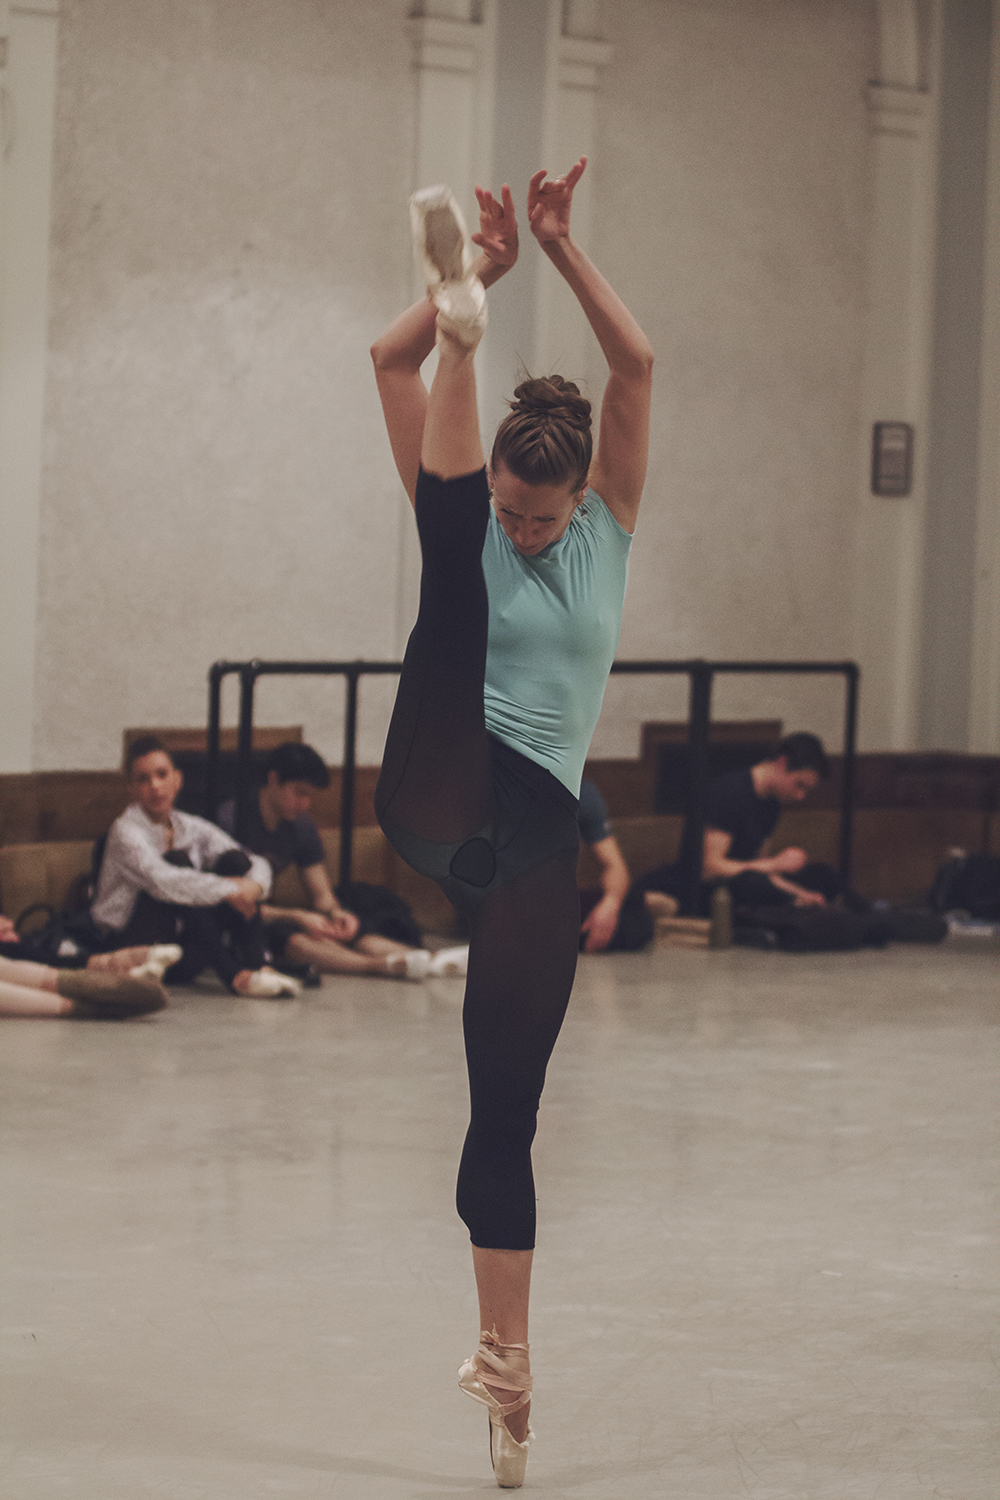 Lesley Rausch in City Center's Studio 4. Photo by Lindsay Thomas.